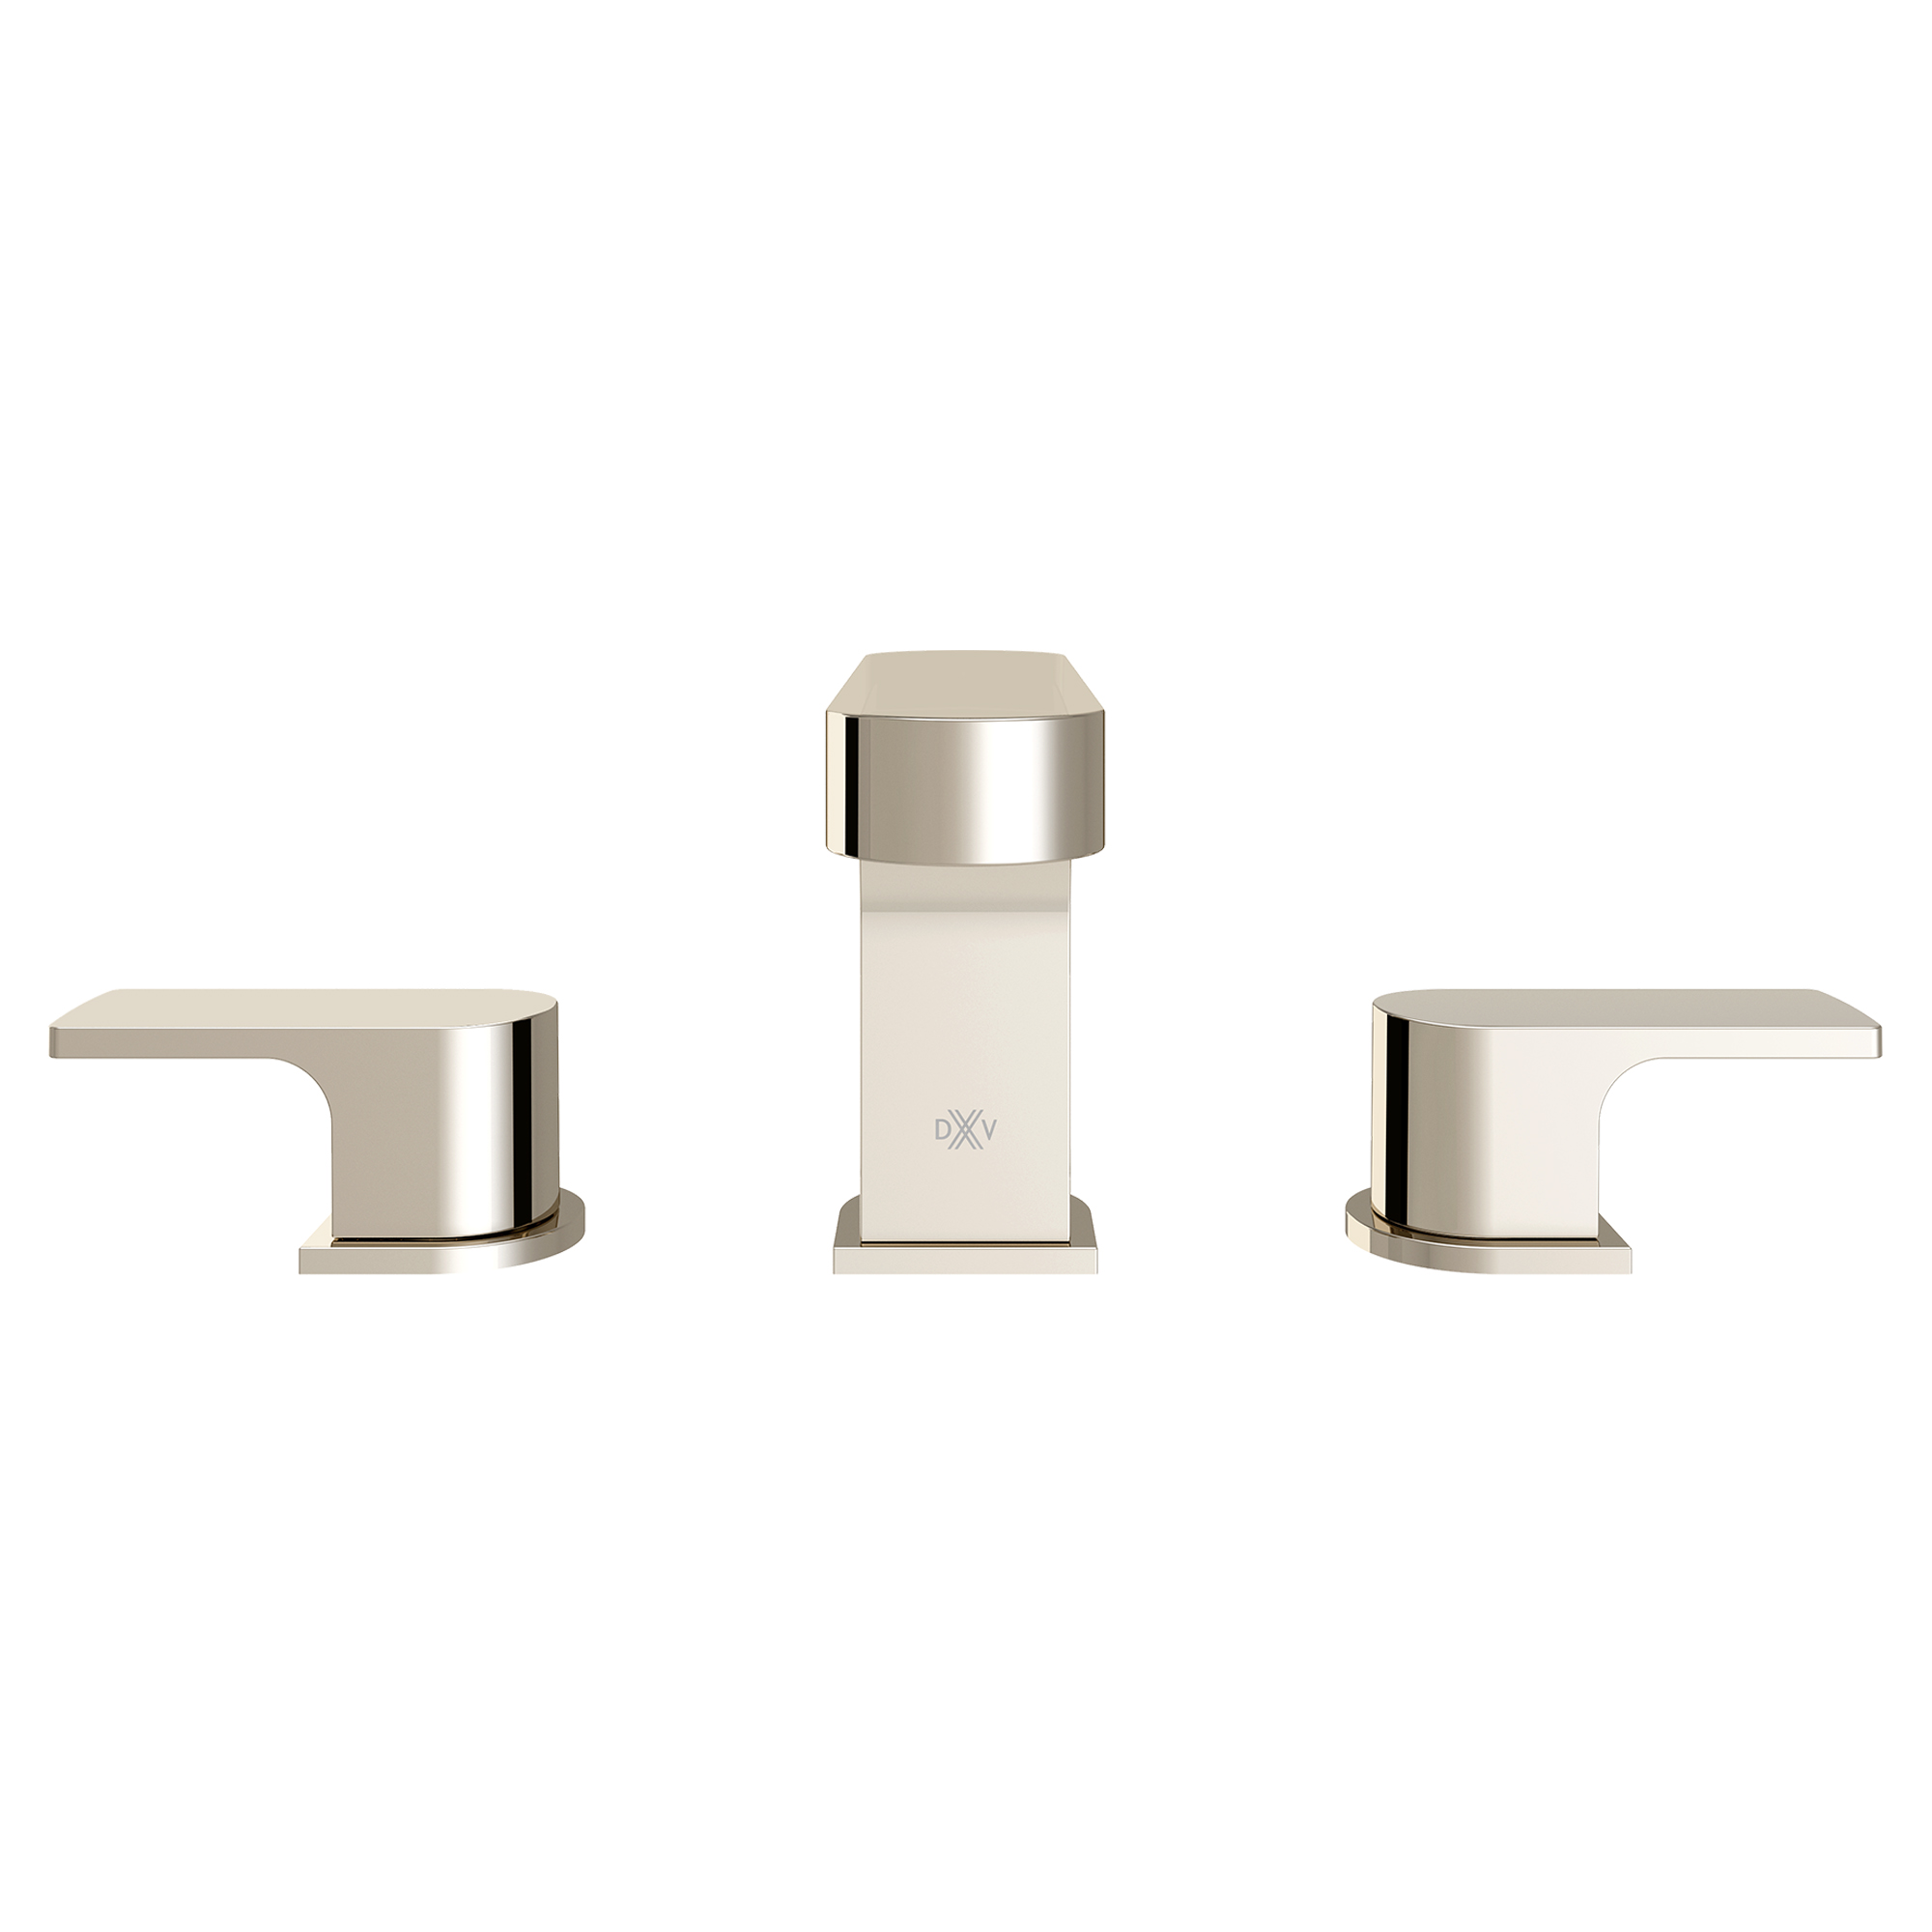 Equility 2-Handle Widespread Bathroom Faucet with Lever Handles